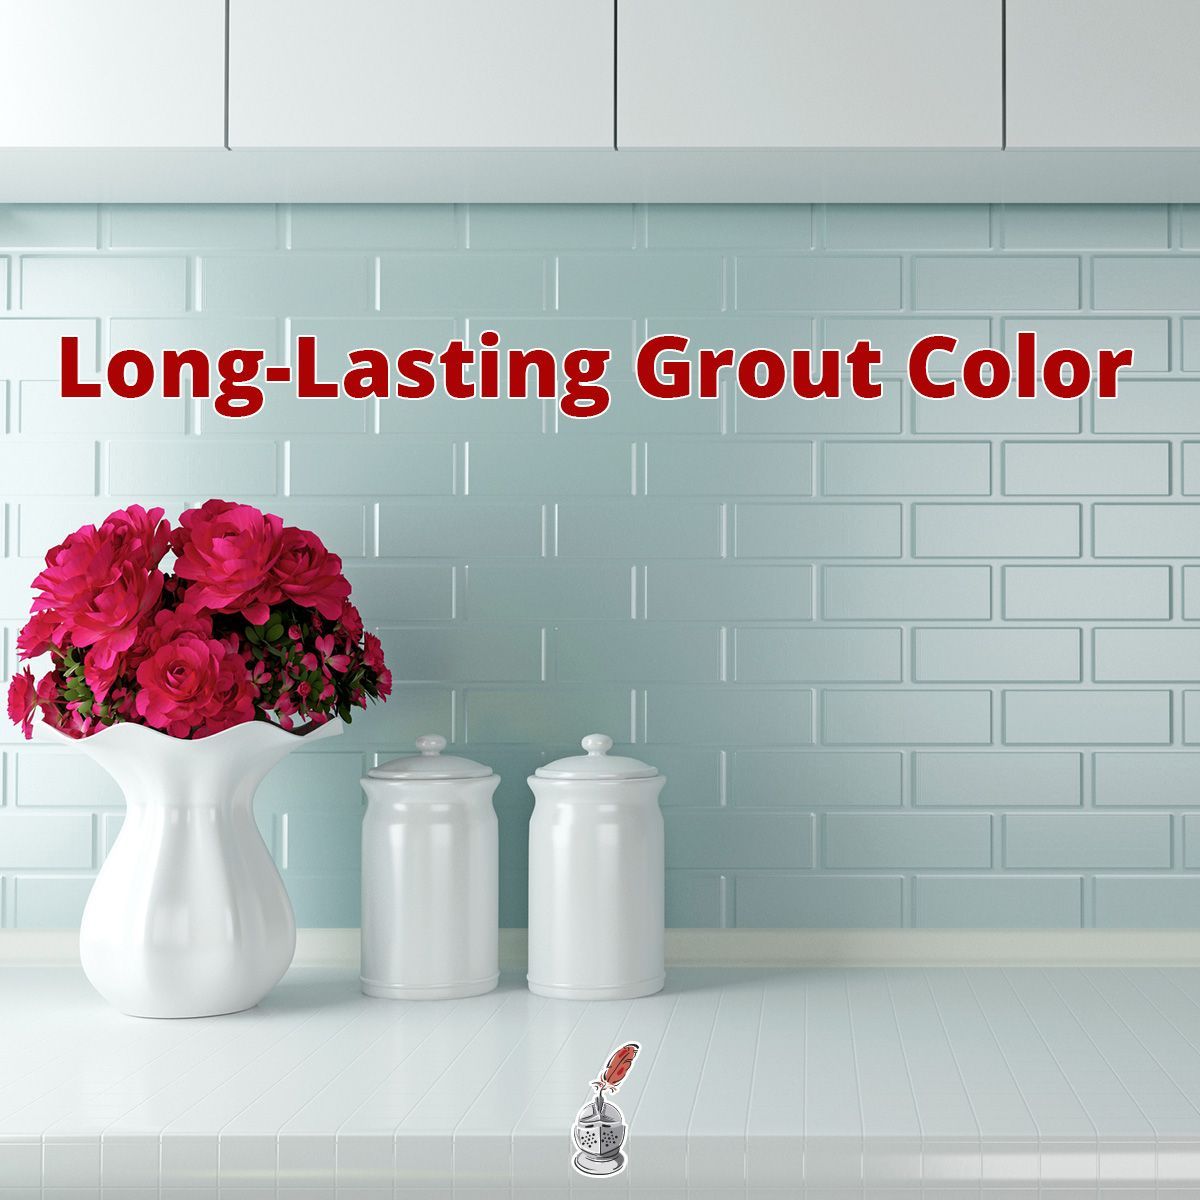 Long-Lasting Grout Color